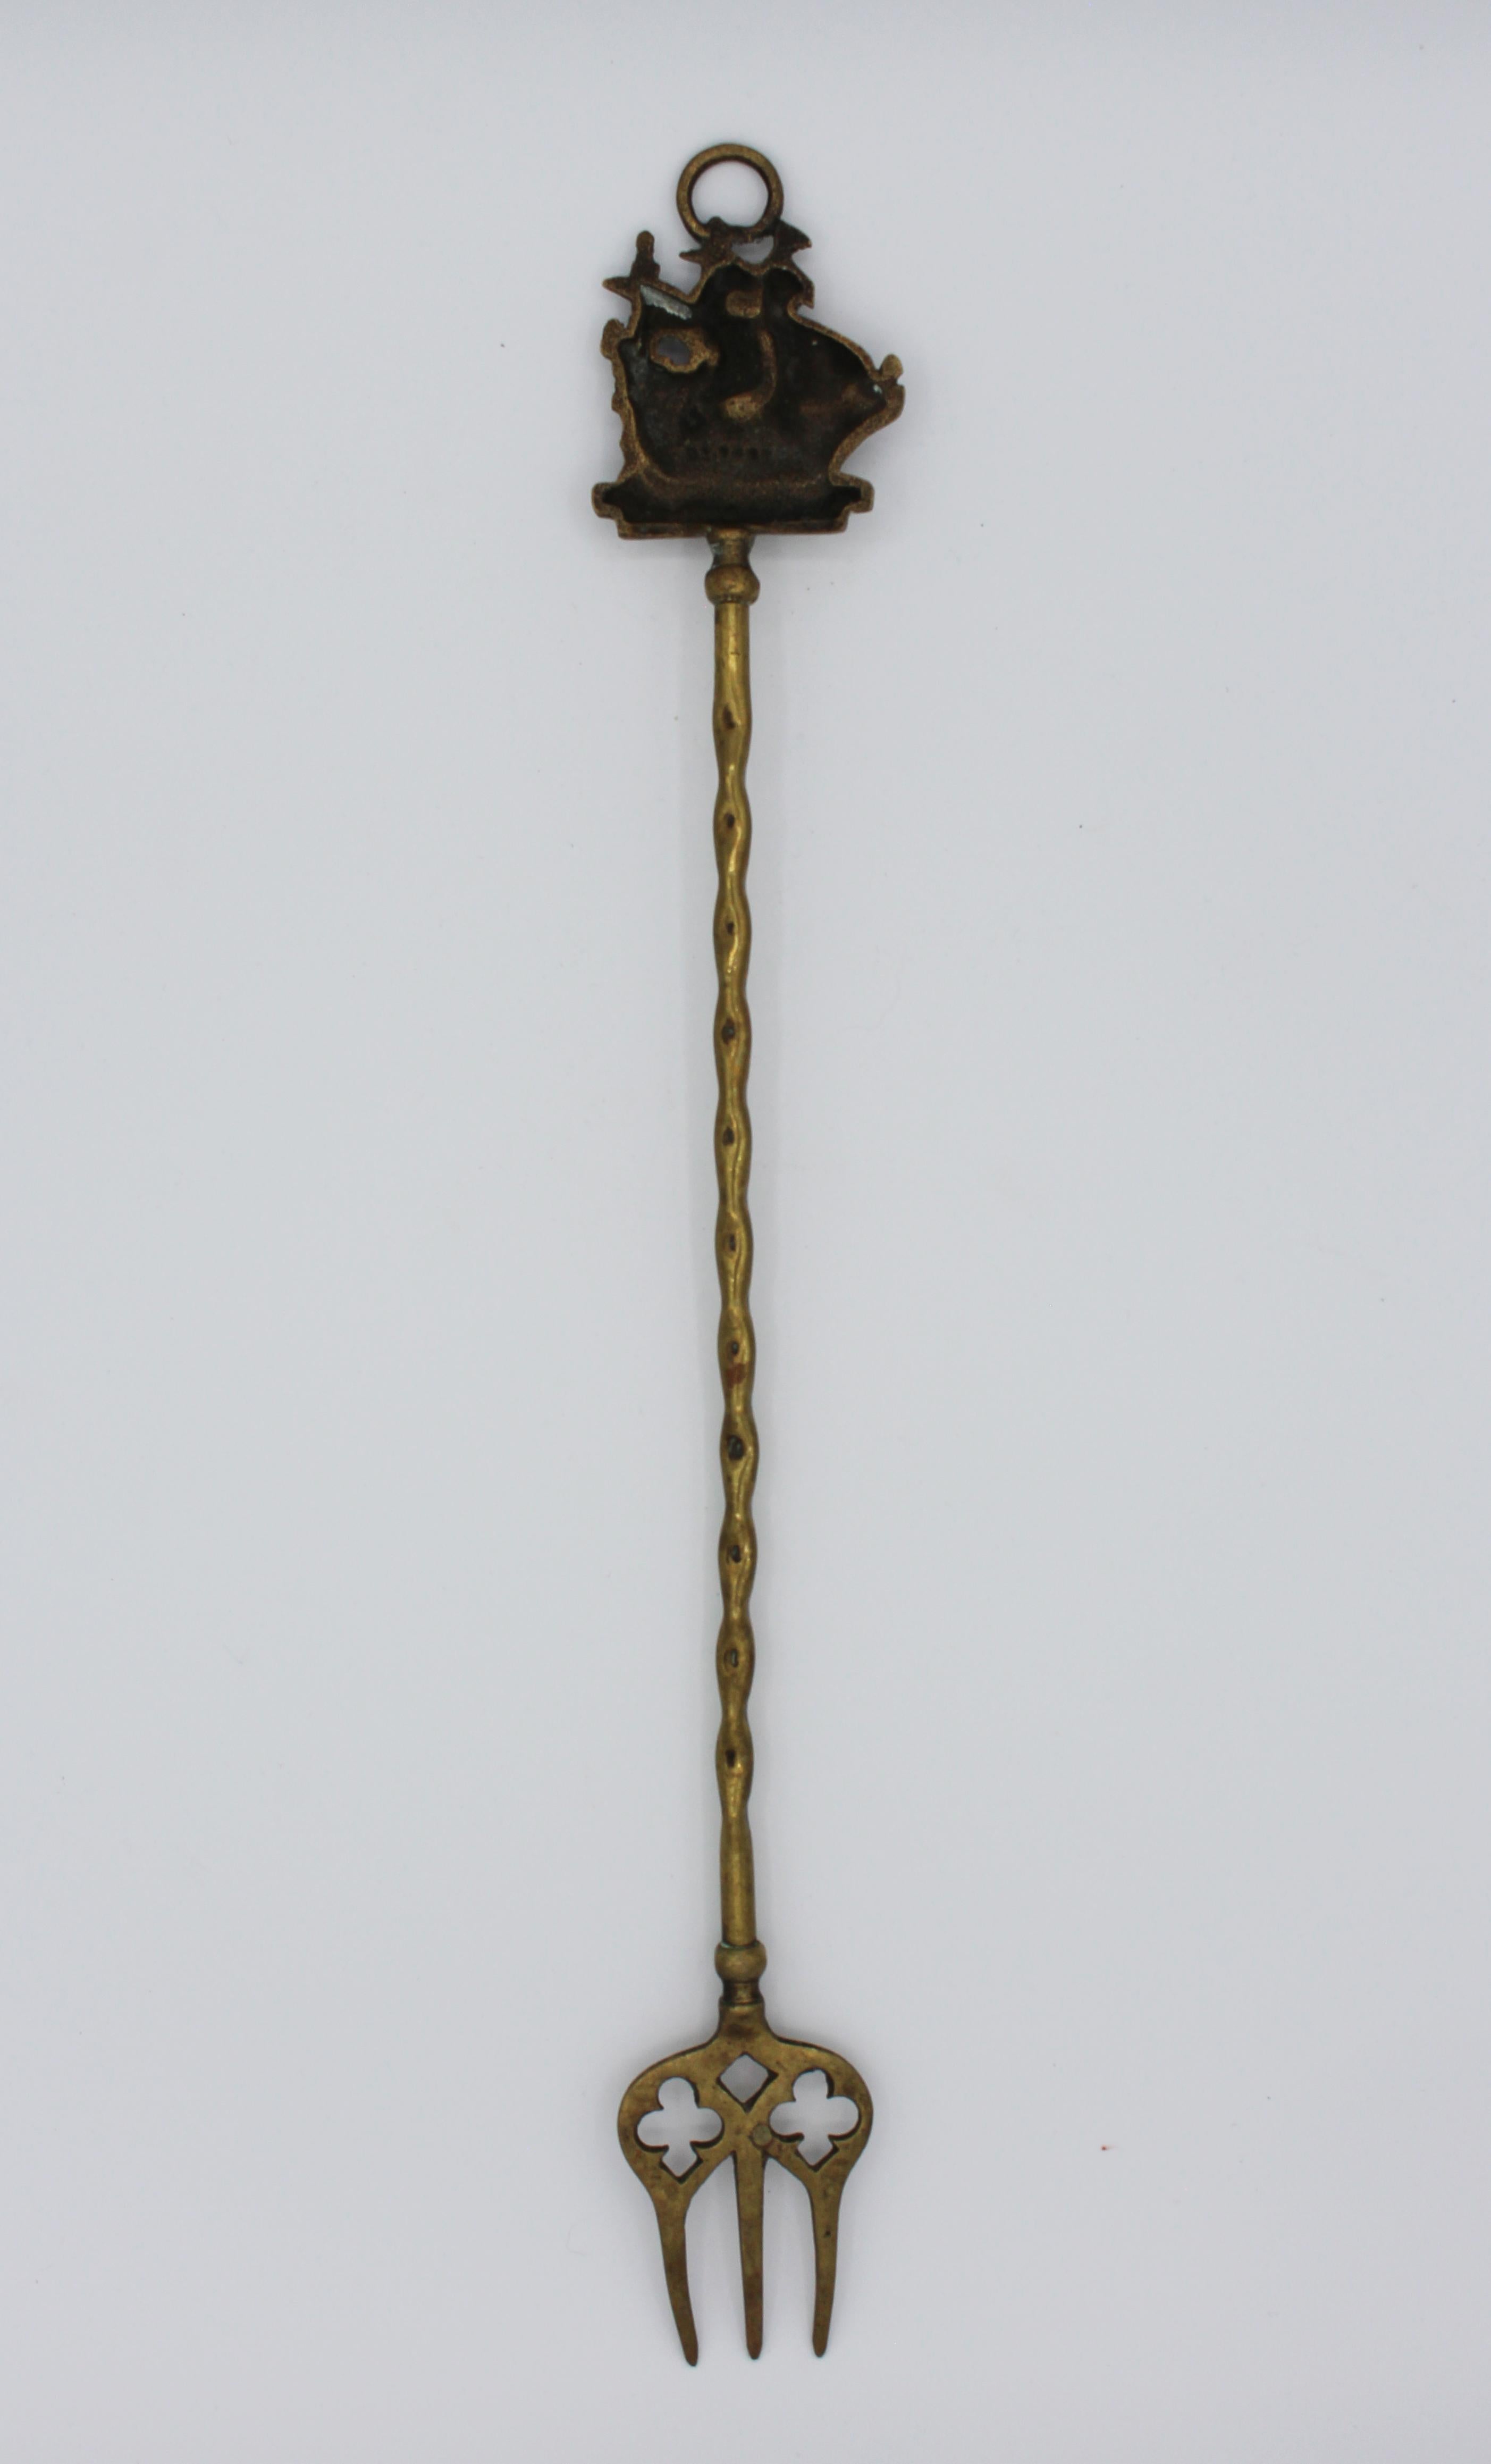 Early-Mid 20th Century English Toasting Fork with an 